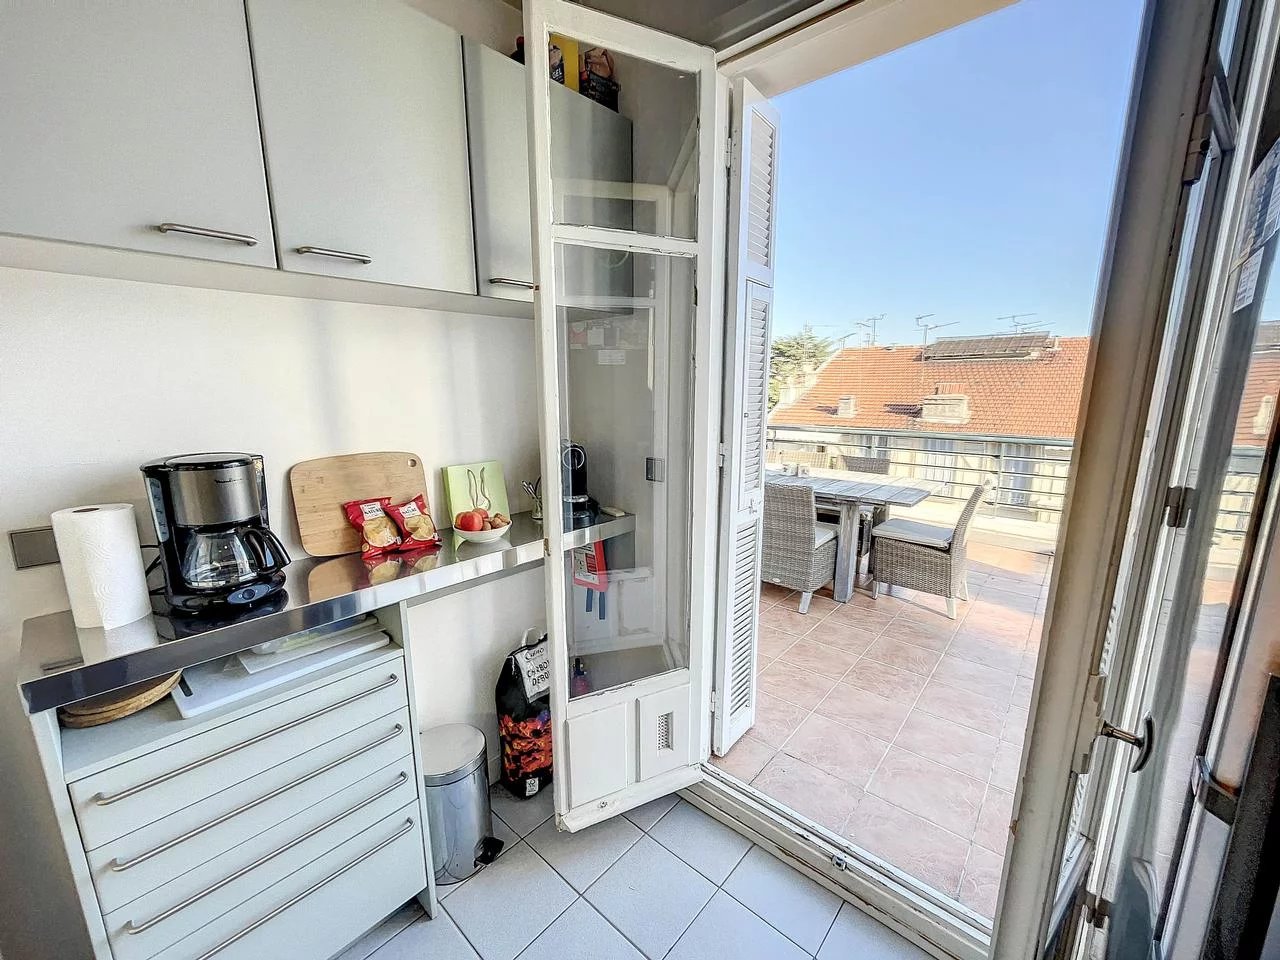 Appartement  3 Rooms 67m2  for sale   850 000 €